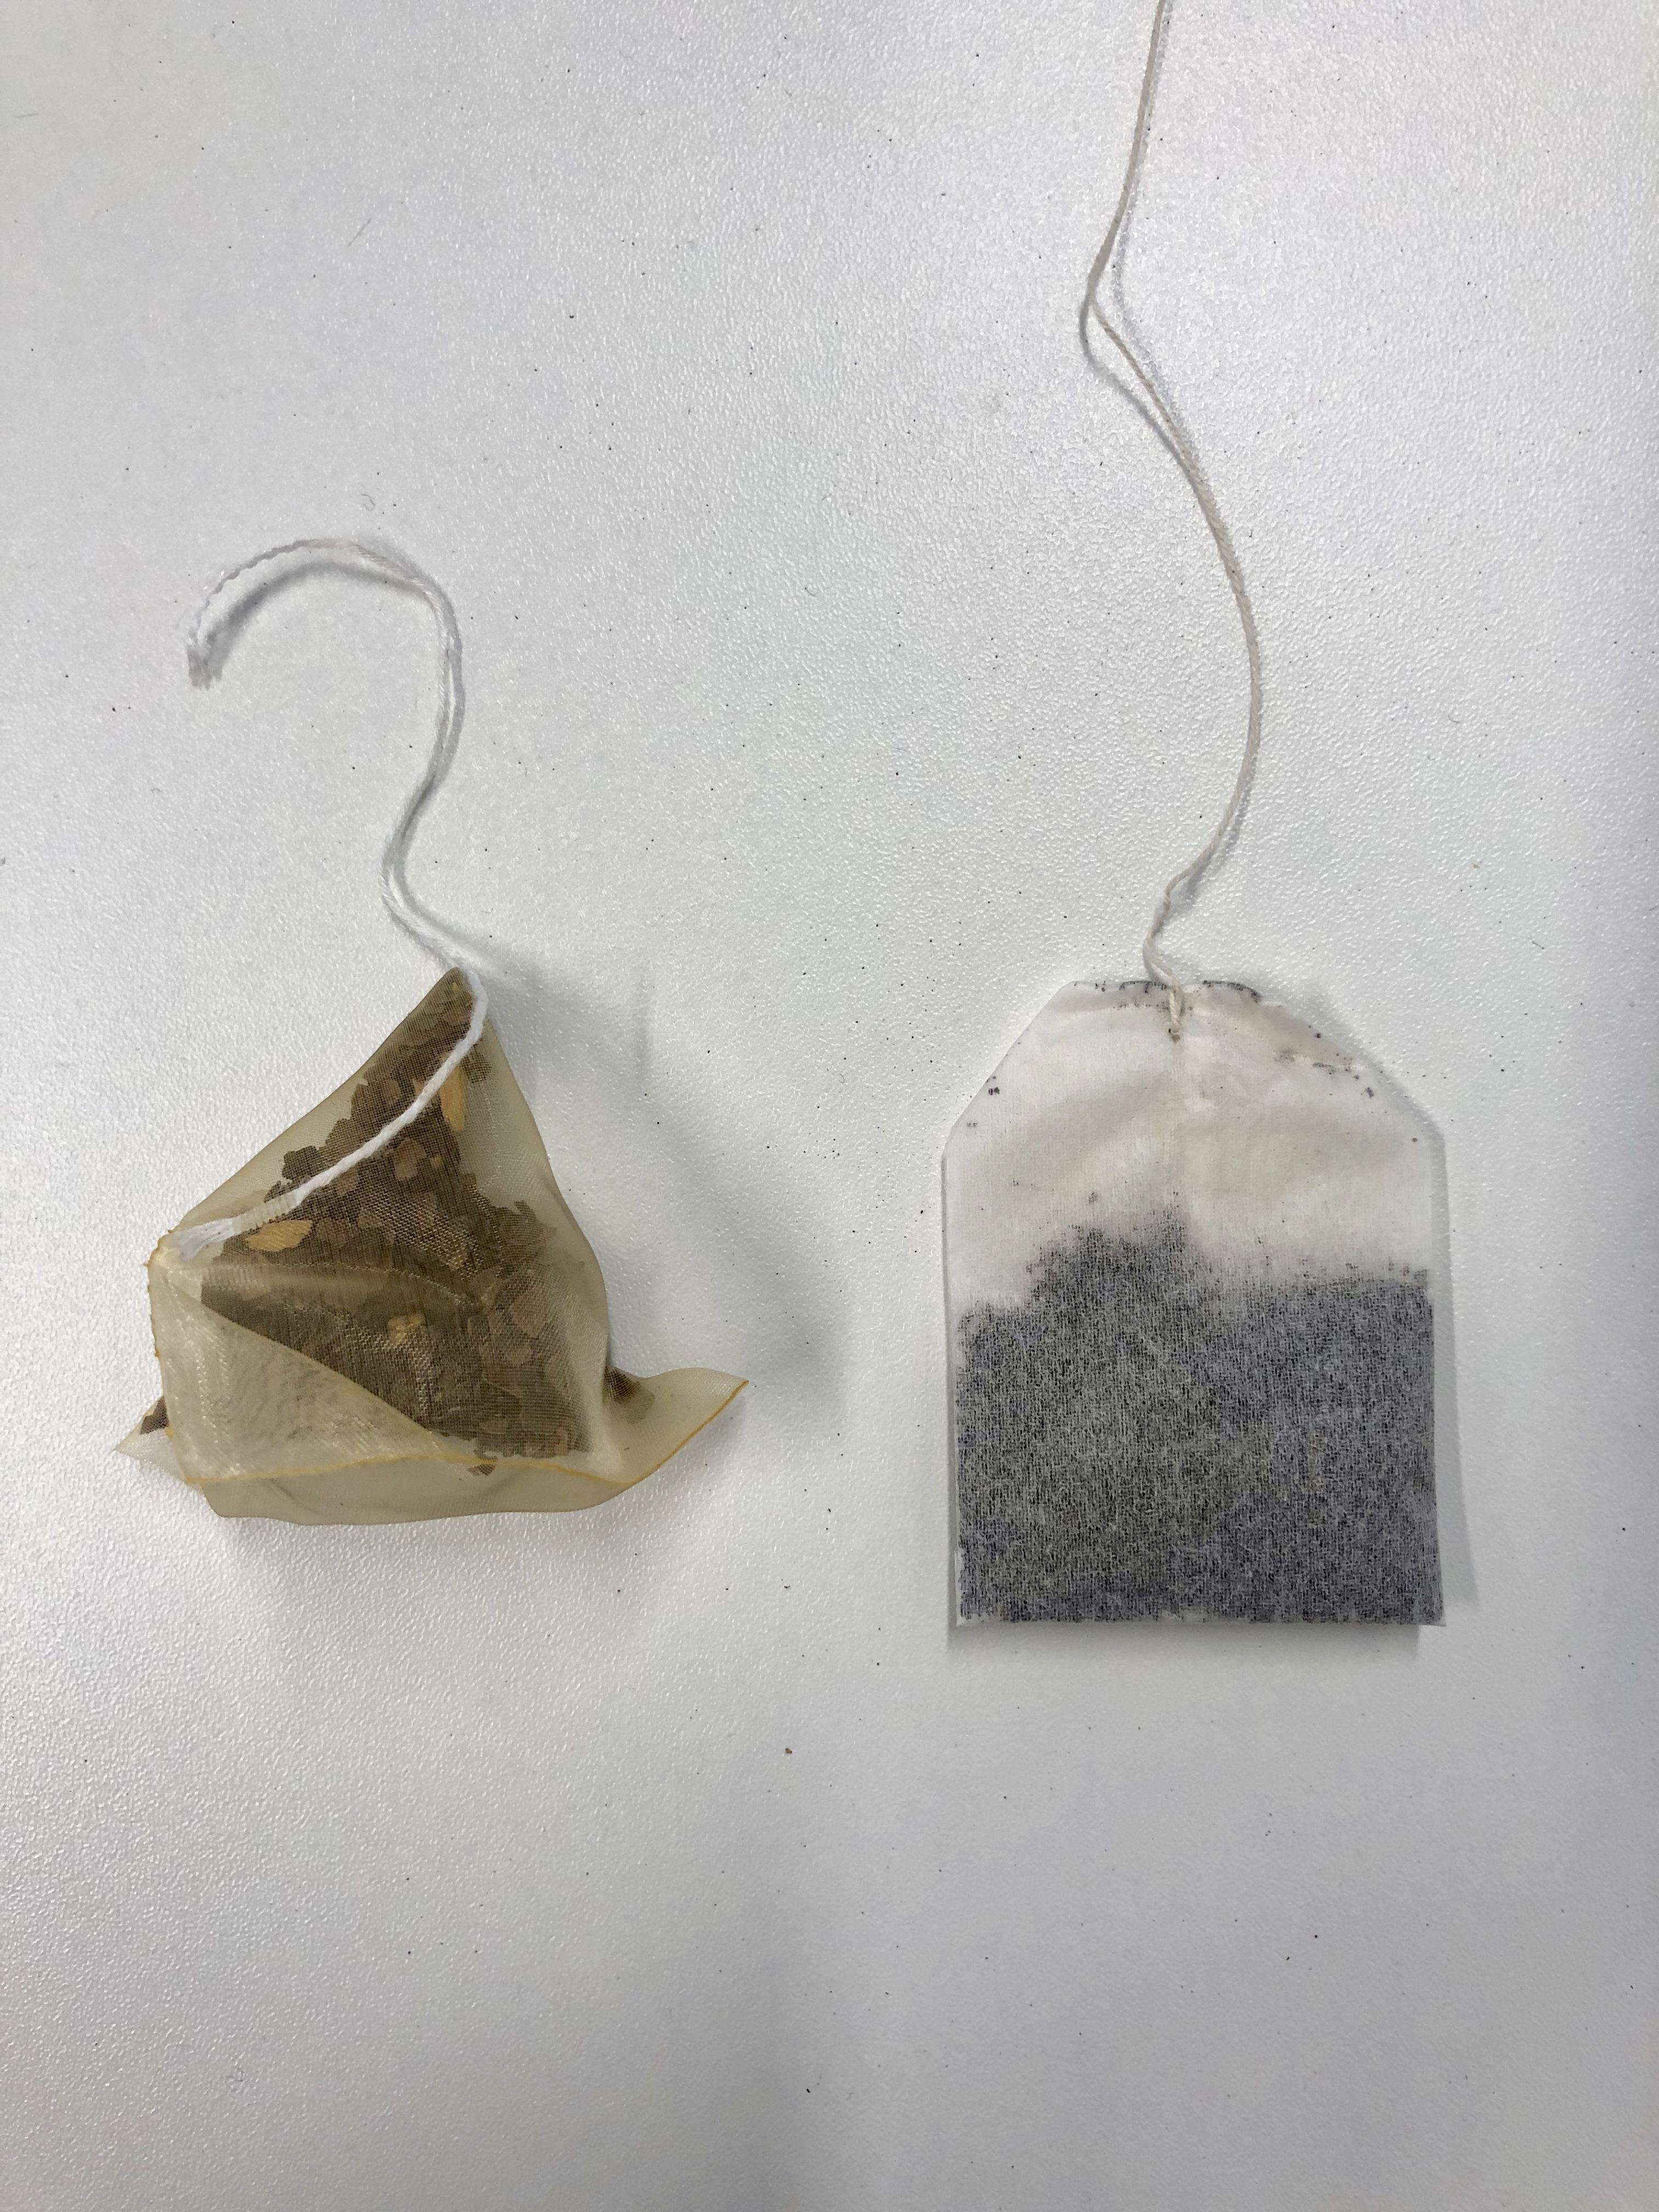 Is Your Tea Bag Made with Plastic? - Center for Environmental Health